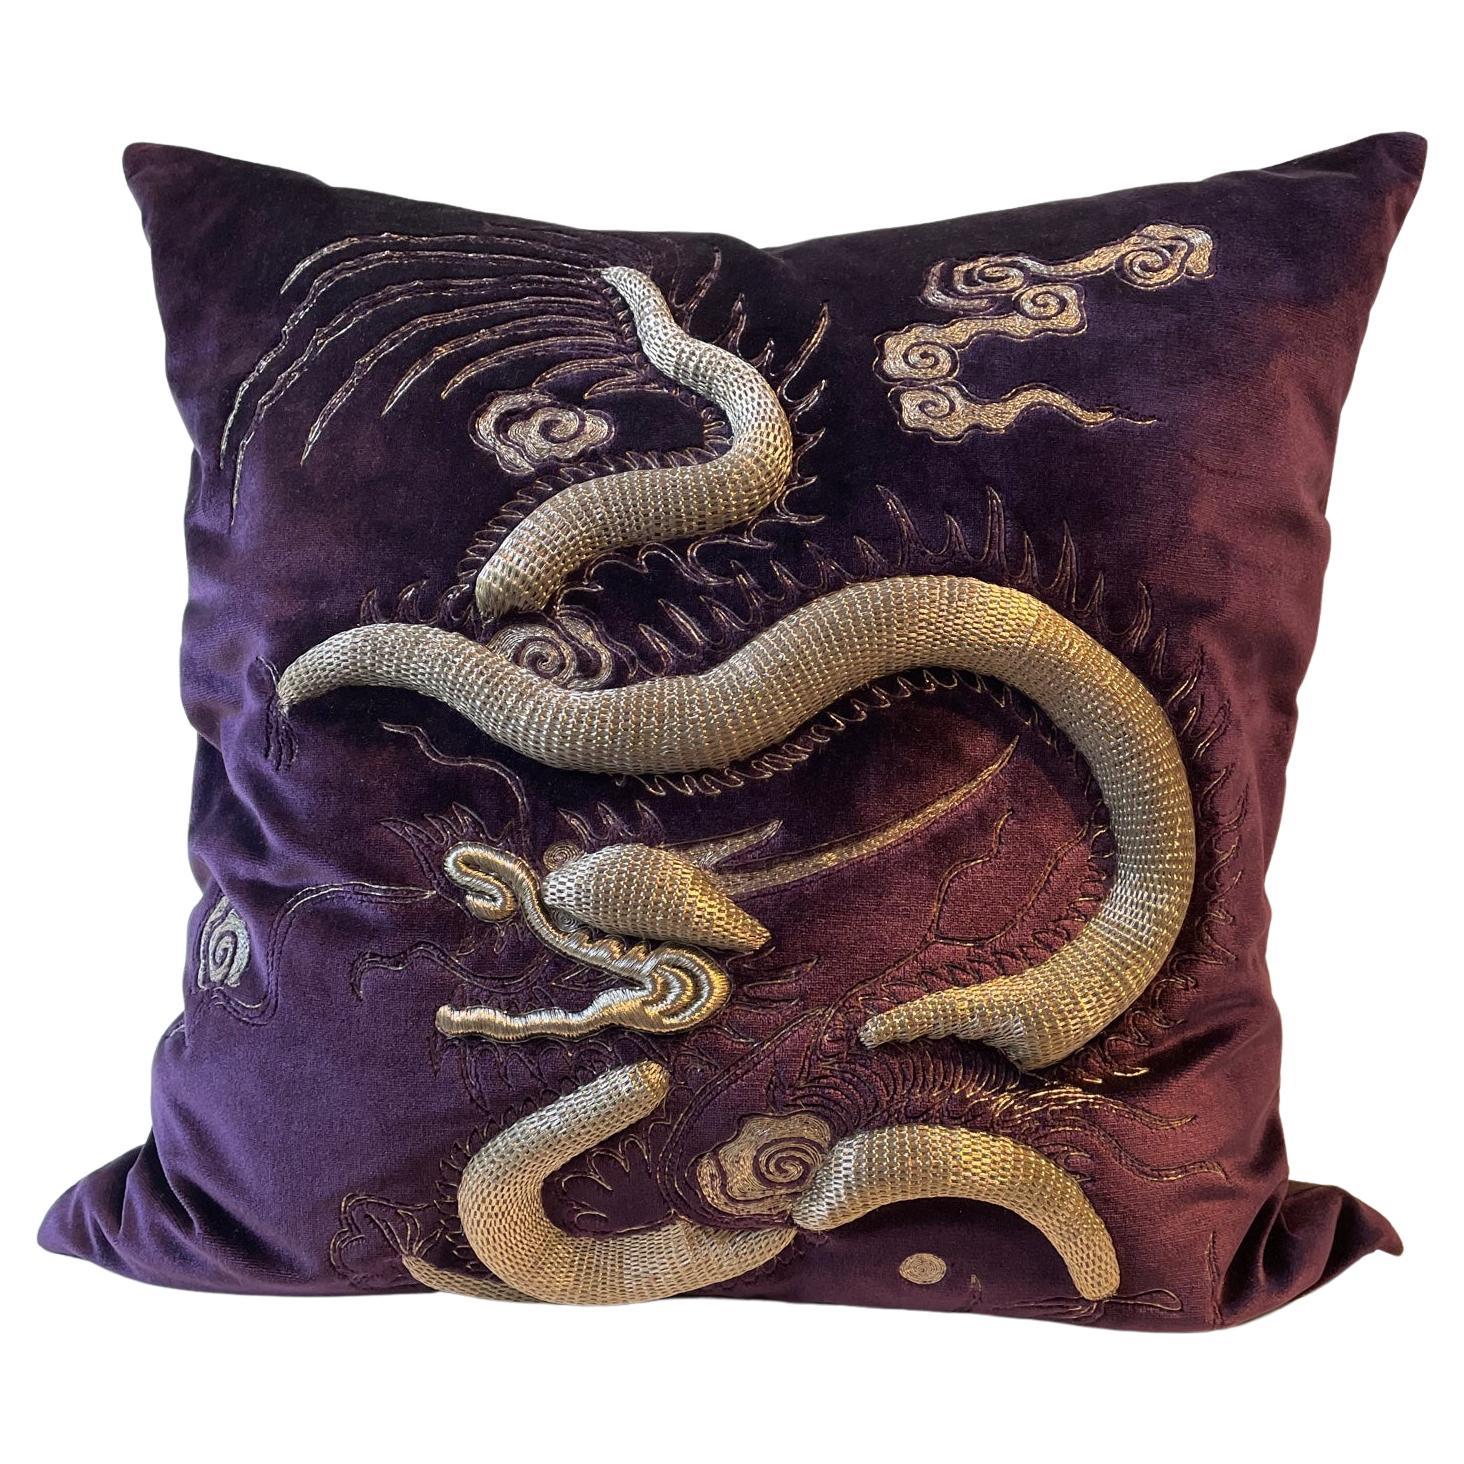 Dark Purple Velvet Cushion Dragon Hand Embroidery Silver Thread Square Shaped For Sale